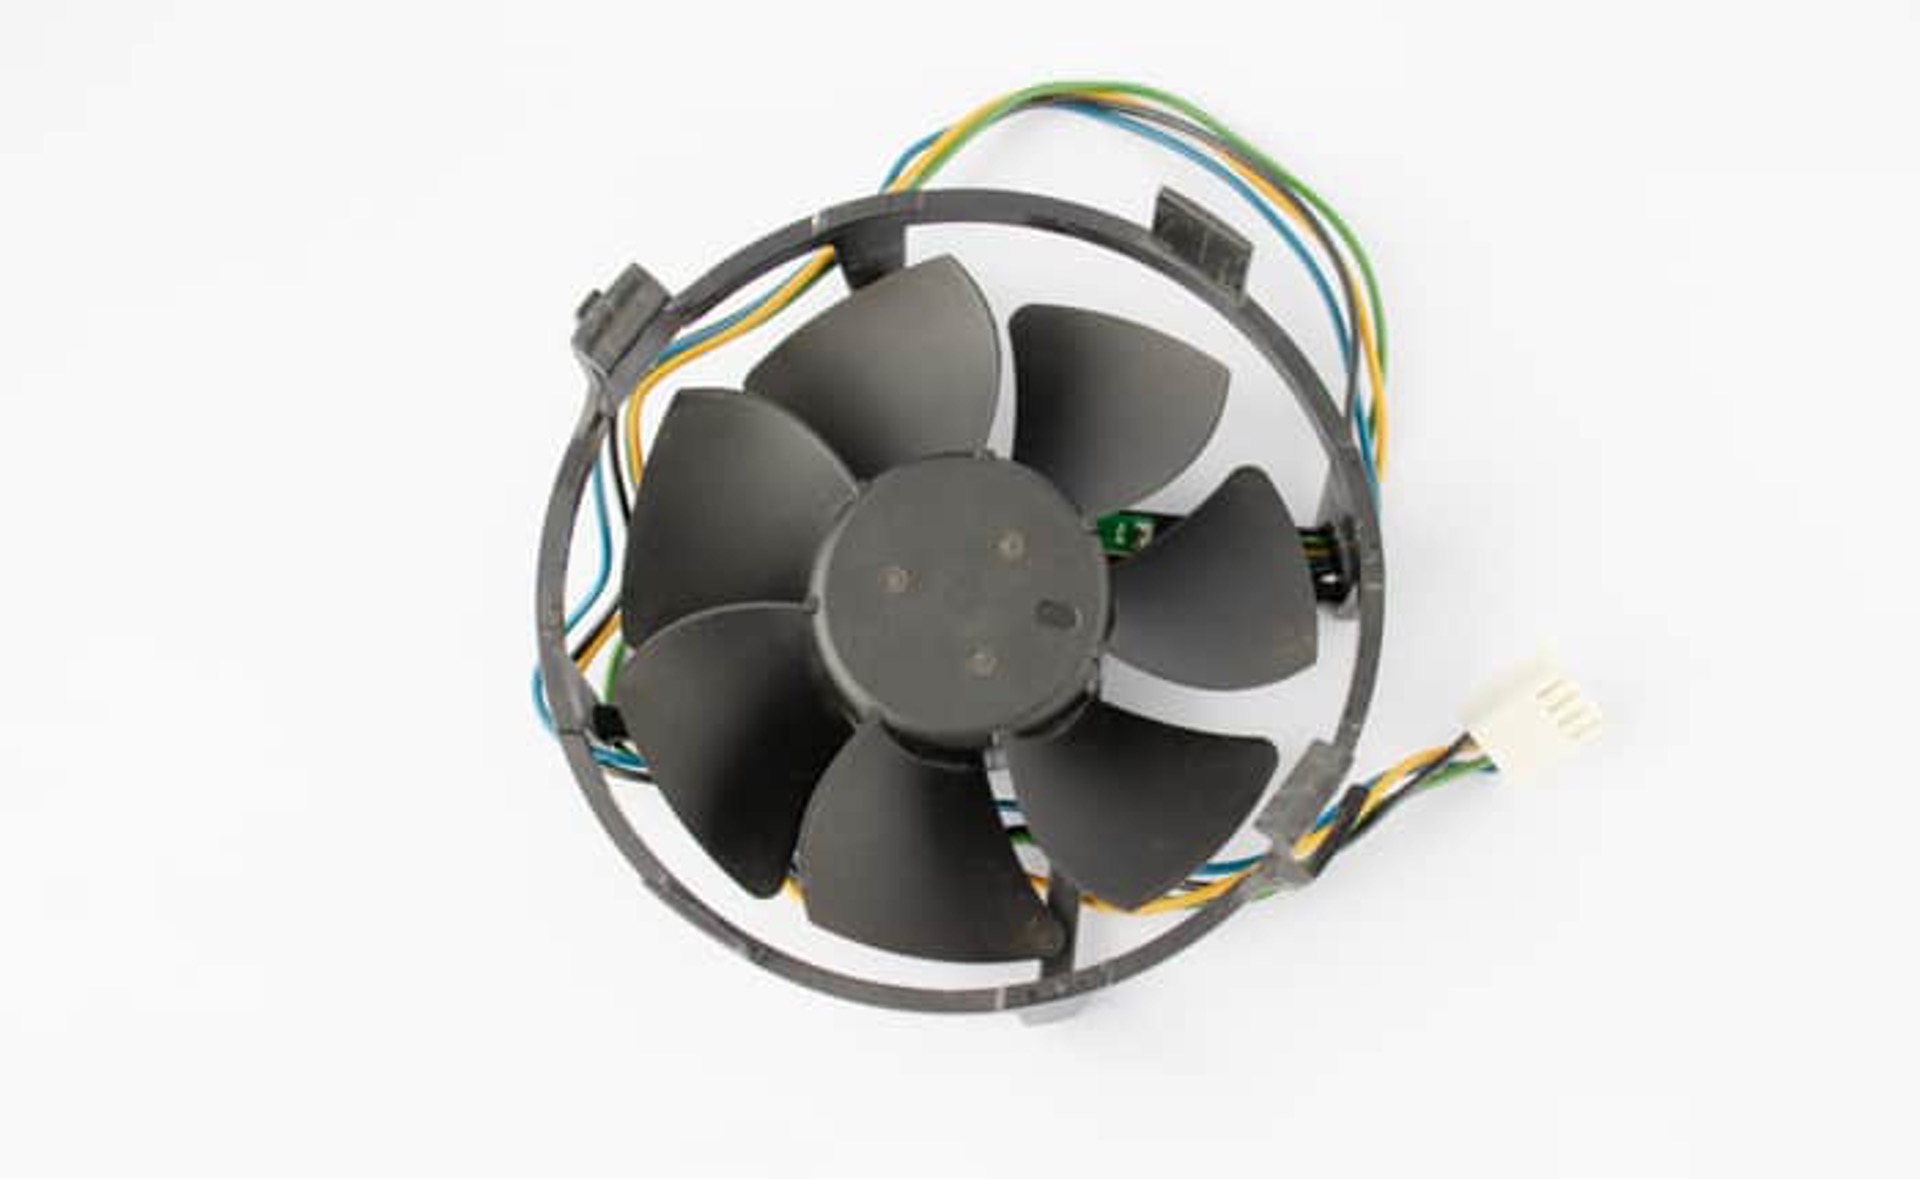 At What Temp Does The Case Fan Turn On?